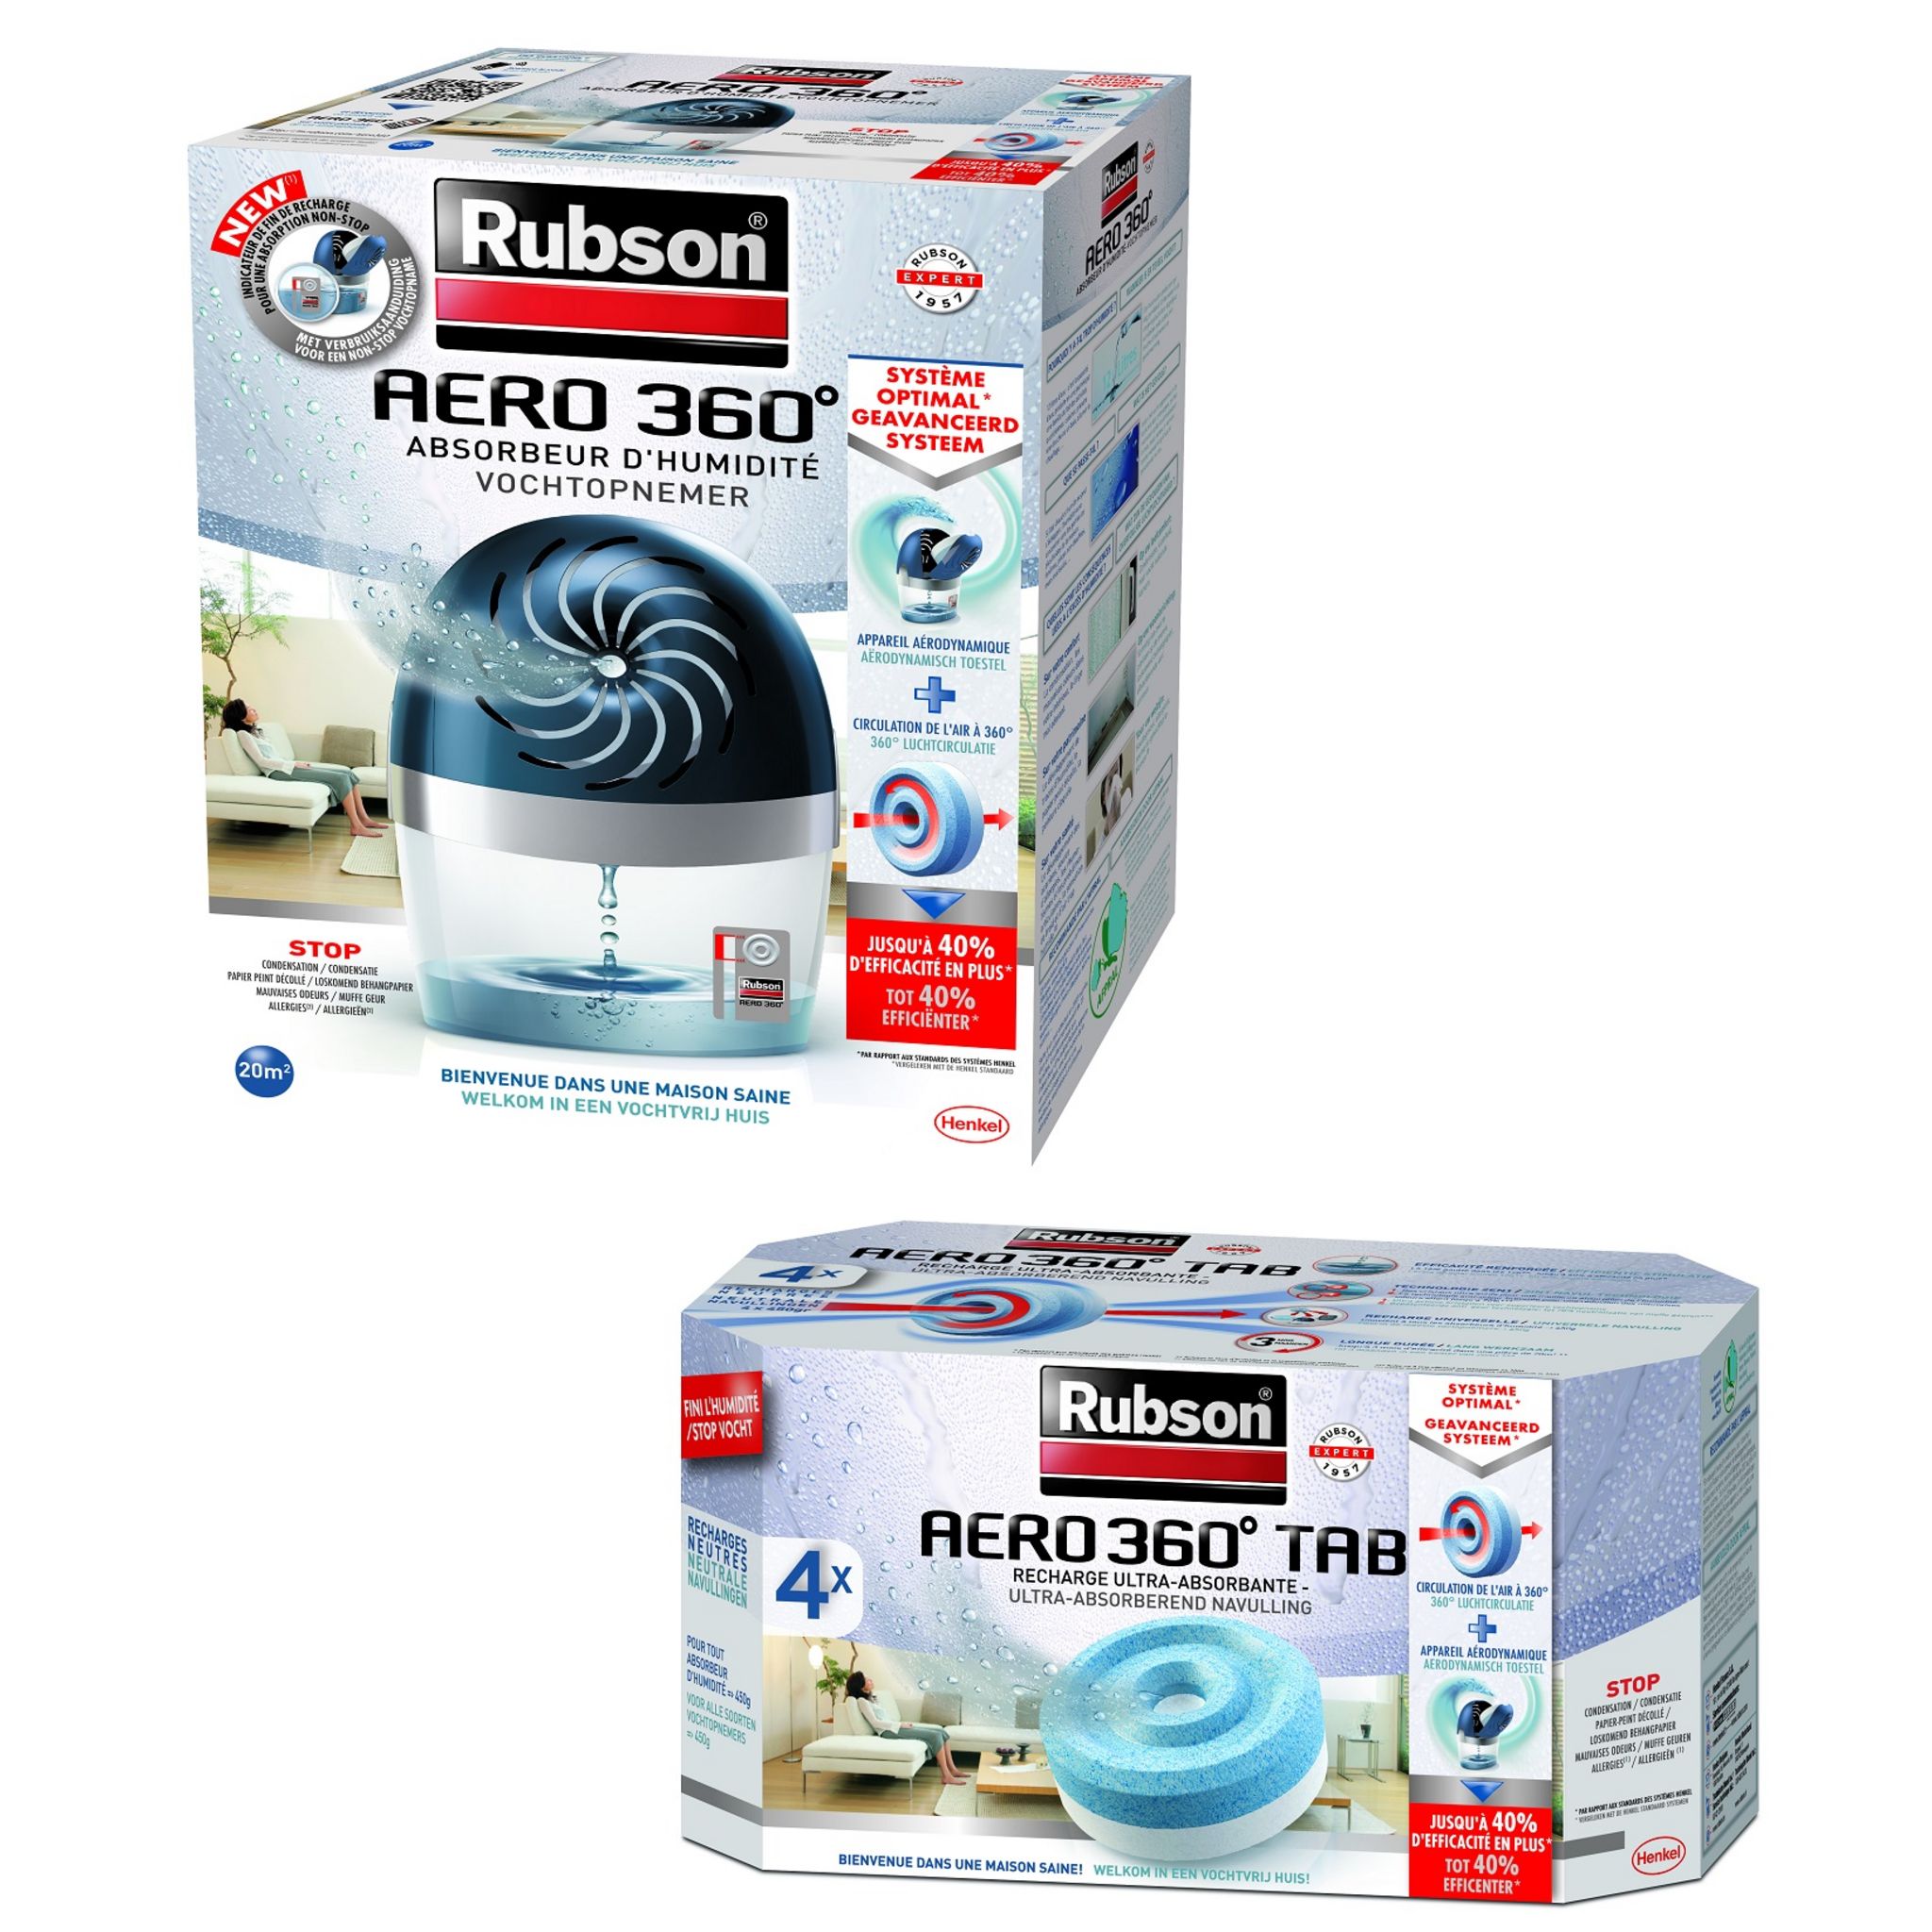 RUBSON Absorbeur d'humidité AERO 360 20m² + 4 recharges AERO 360